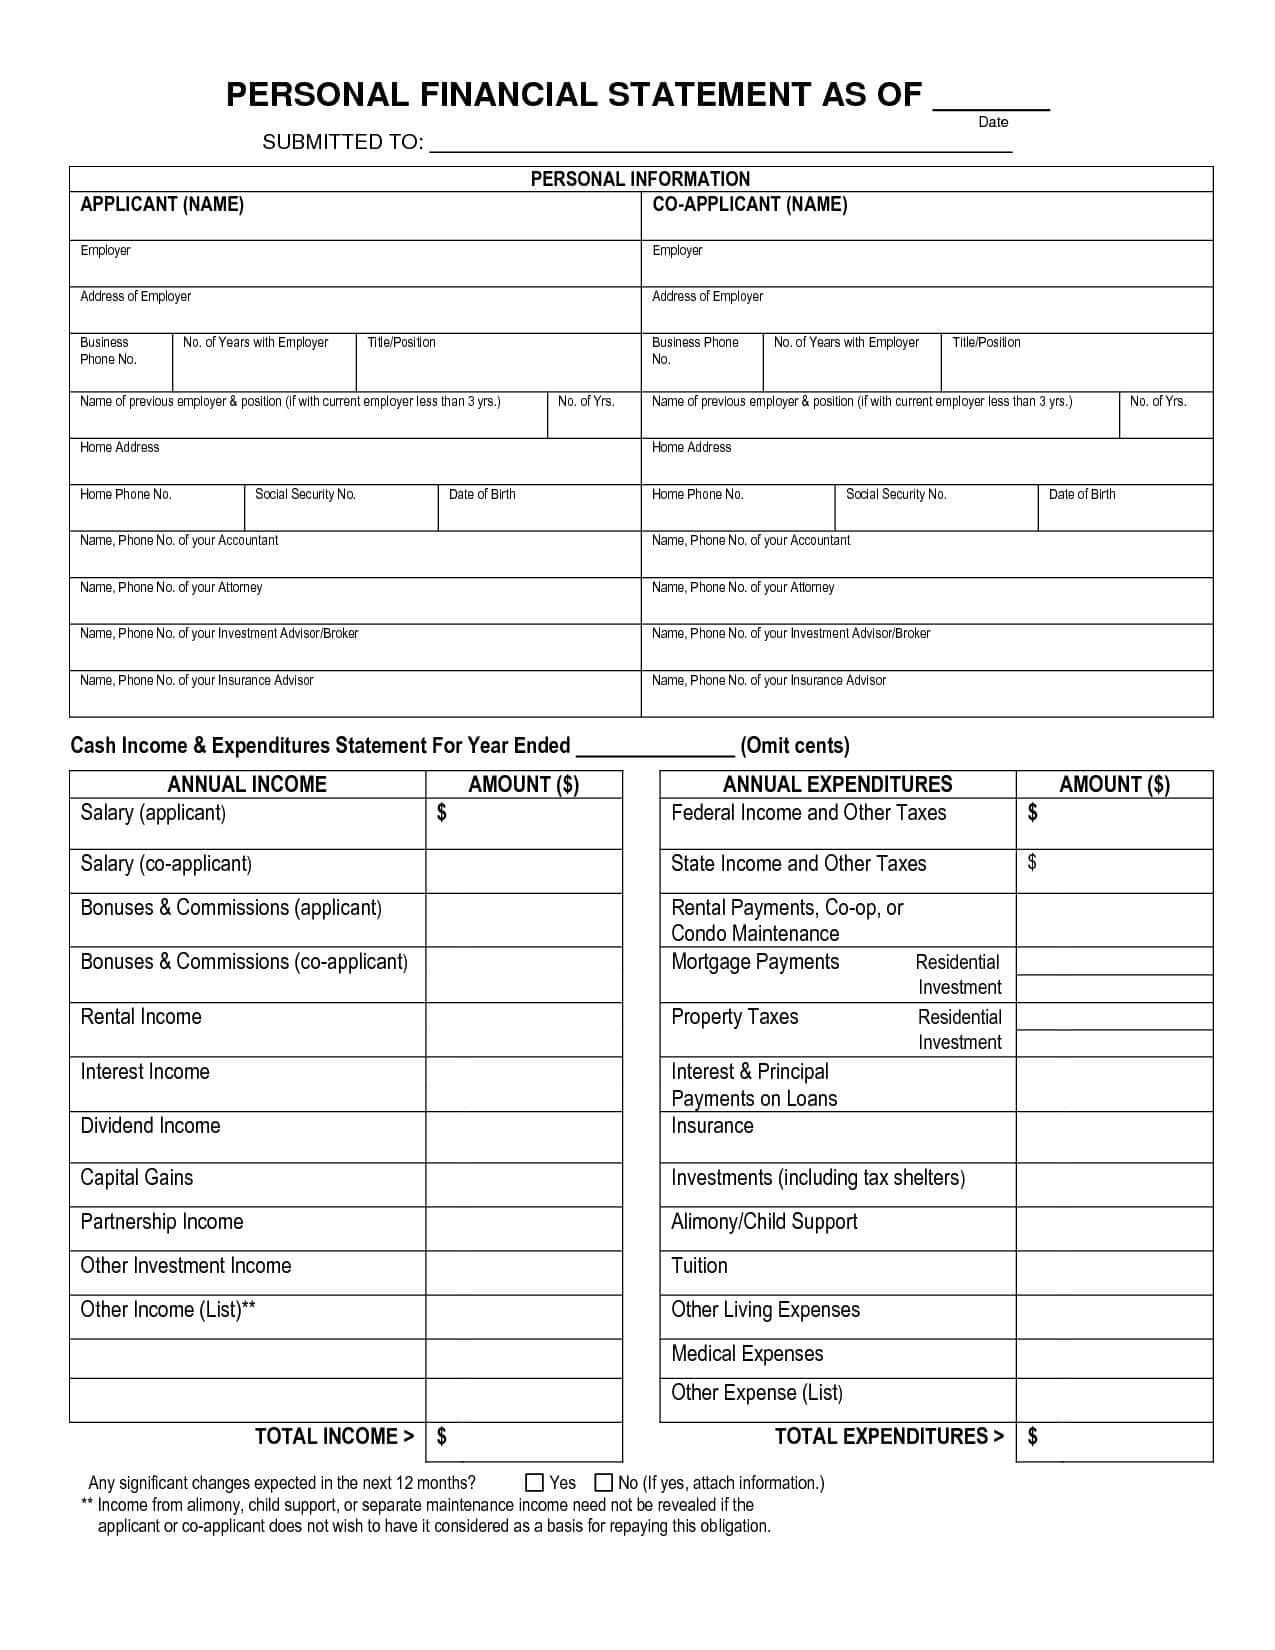 Assets and Liabilities Worksheet assets and Liabilities Worksheet Template